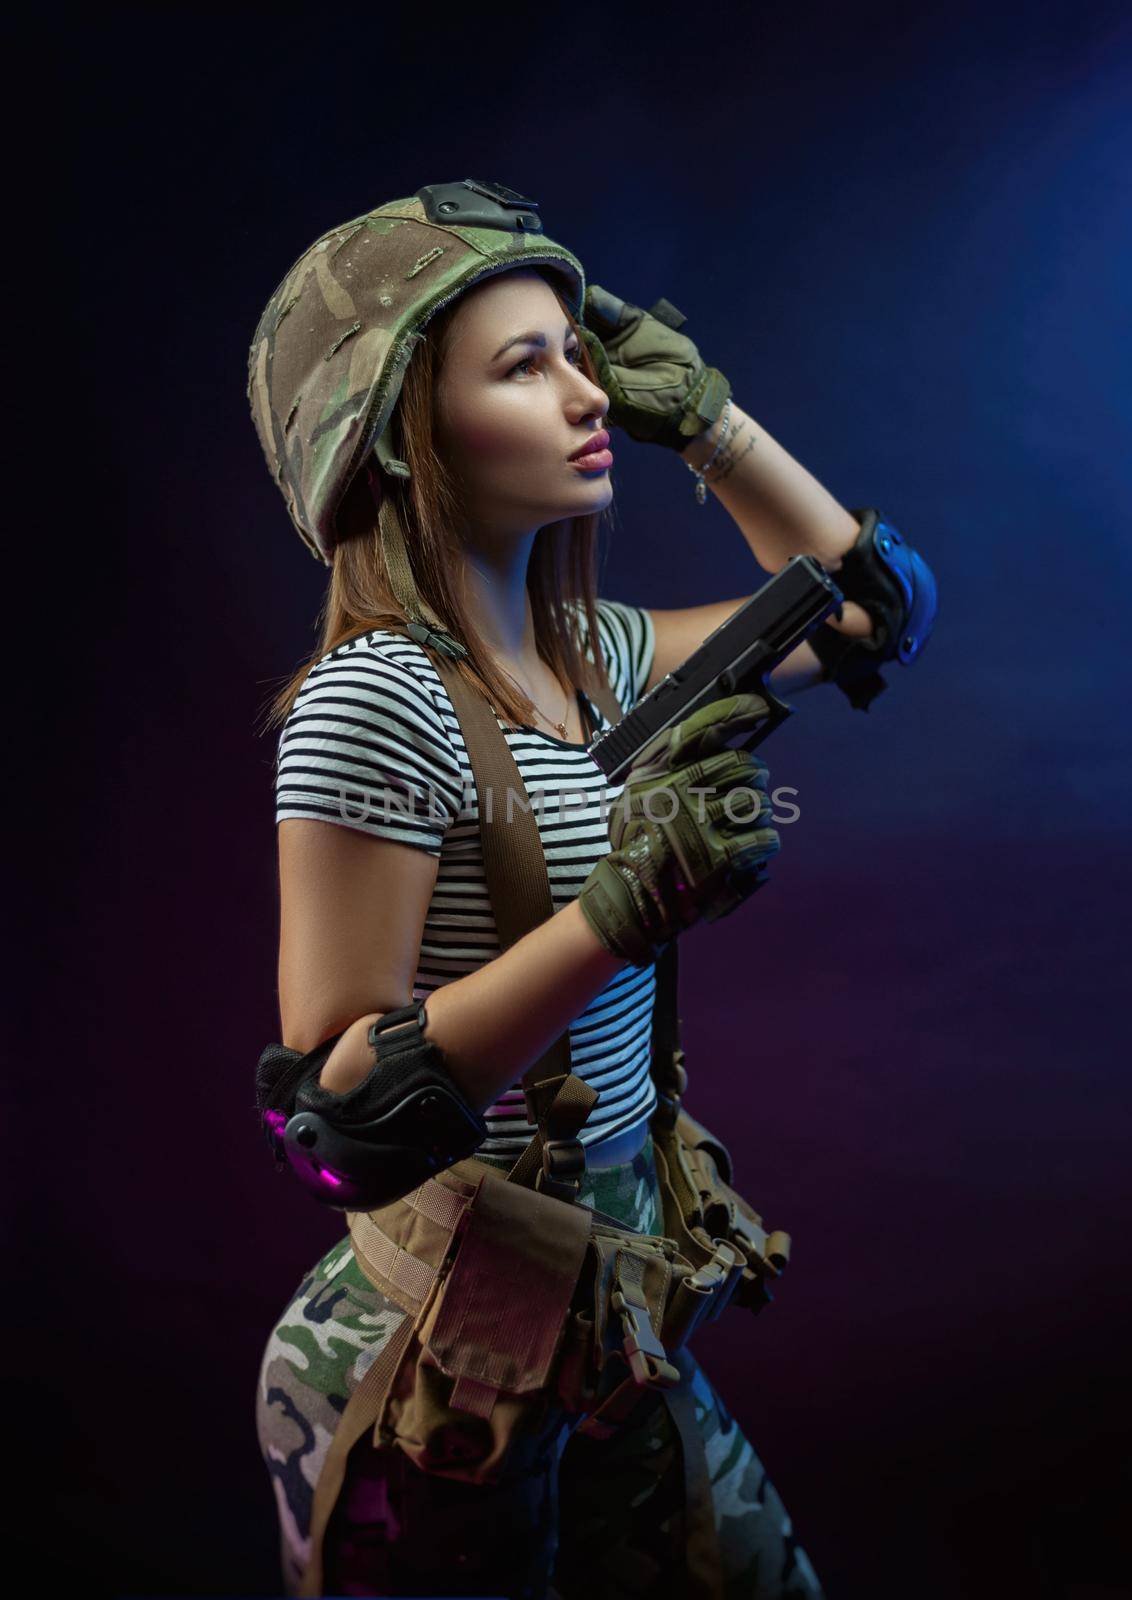 a woman in a military airsoft uniform with an American automatic rifle and a helmet on a dark background by Rotozey